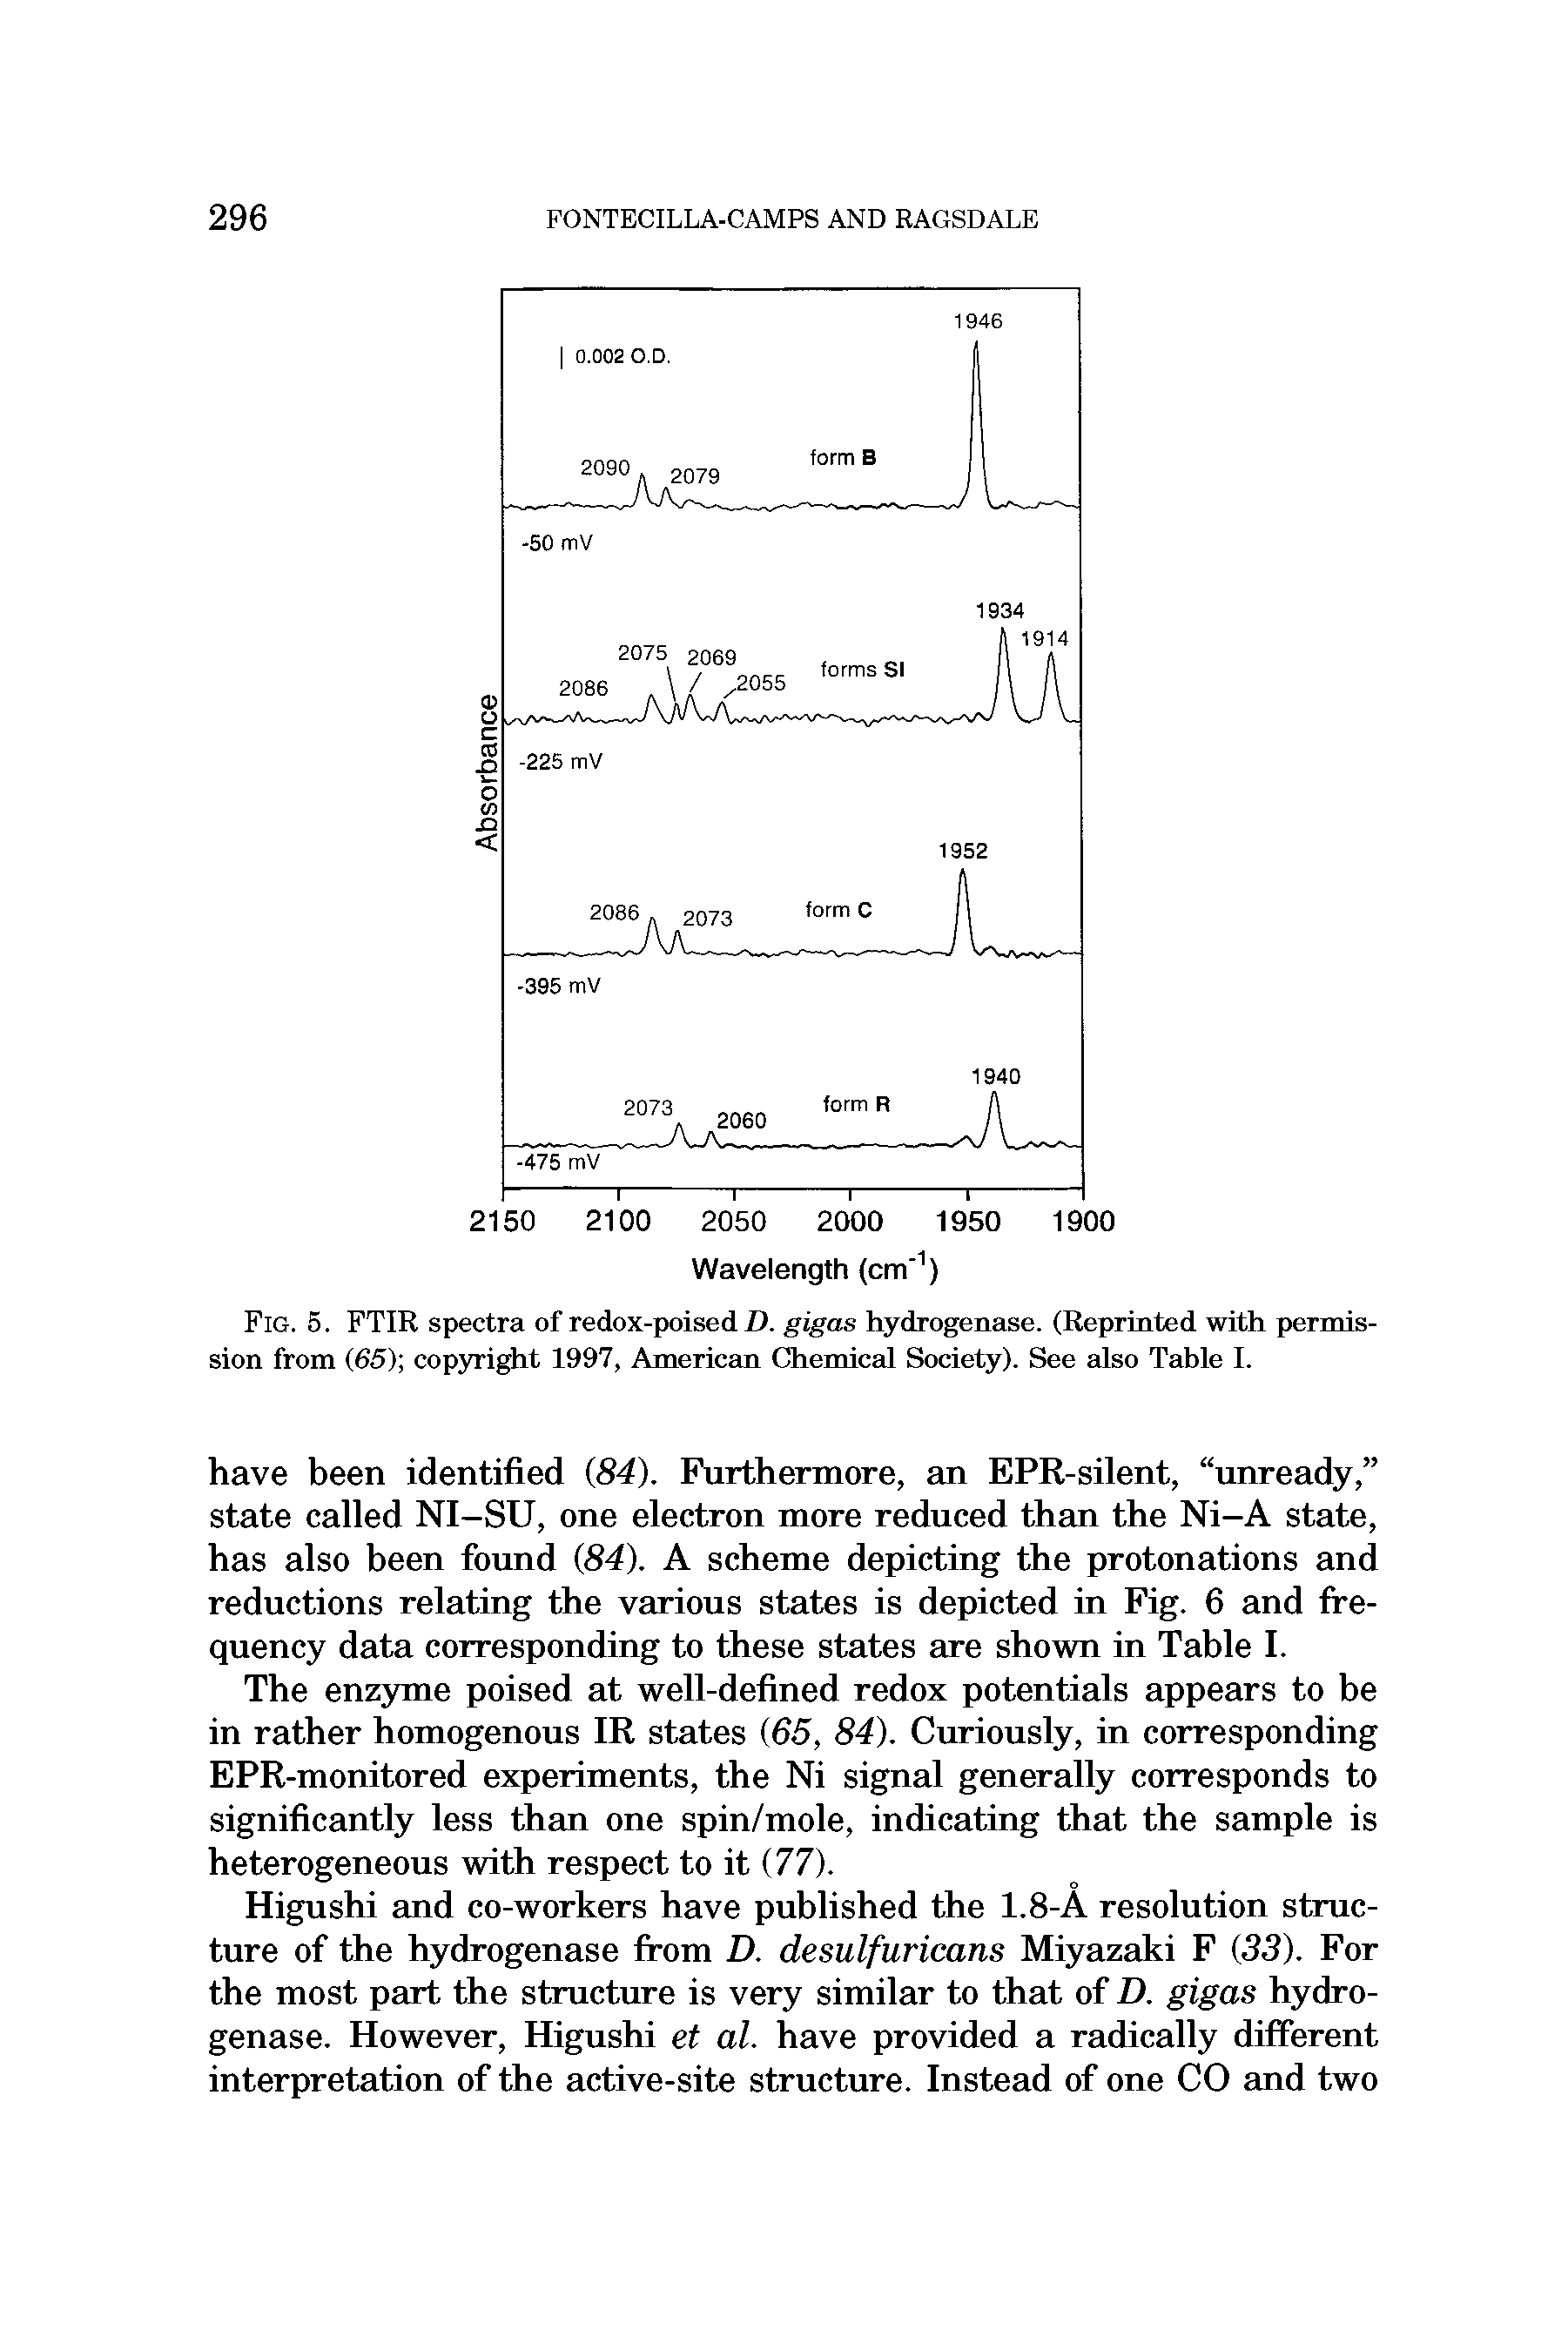 Fig. 5. FTIR spectra of redox-poised D. gigas hydrogenase. (Reprinted with permission from (65) cop3Tight 1997, AmericEm ChemicEd Society). See Edso Table I.